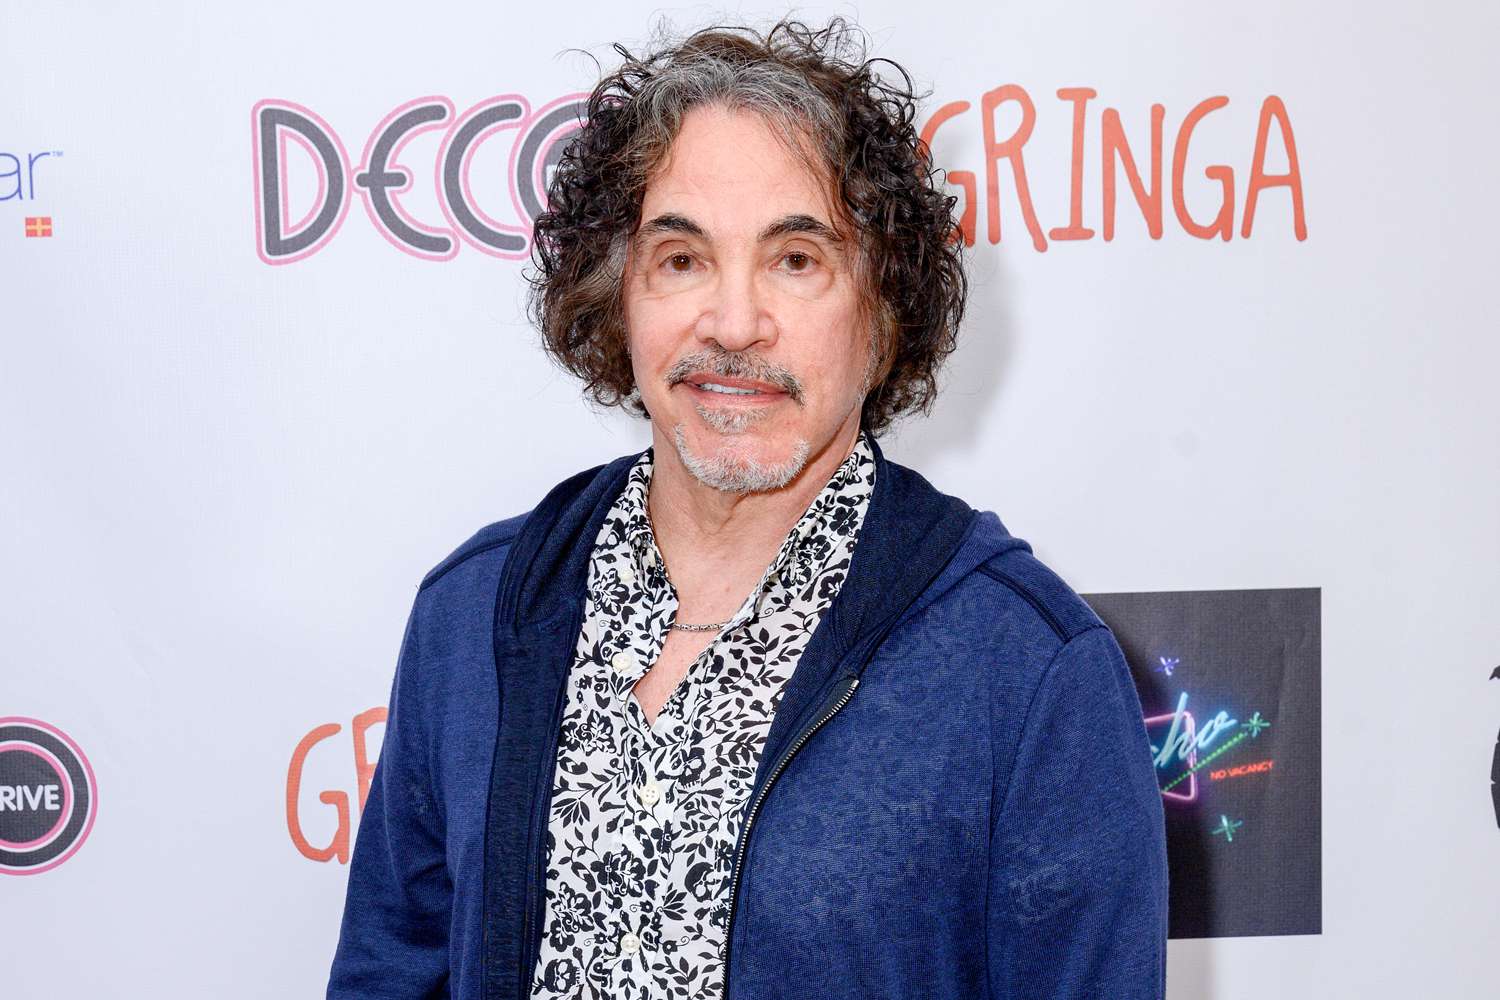 John Oates Expresses Hurt And Disappointment Over Daryl Hall’s Accusations